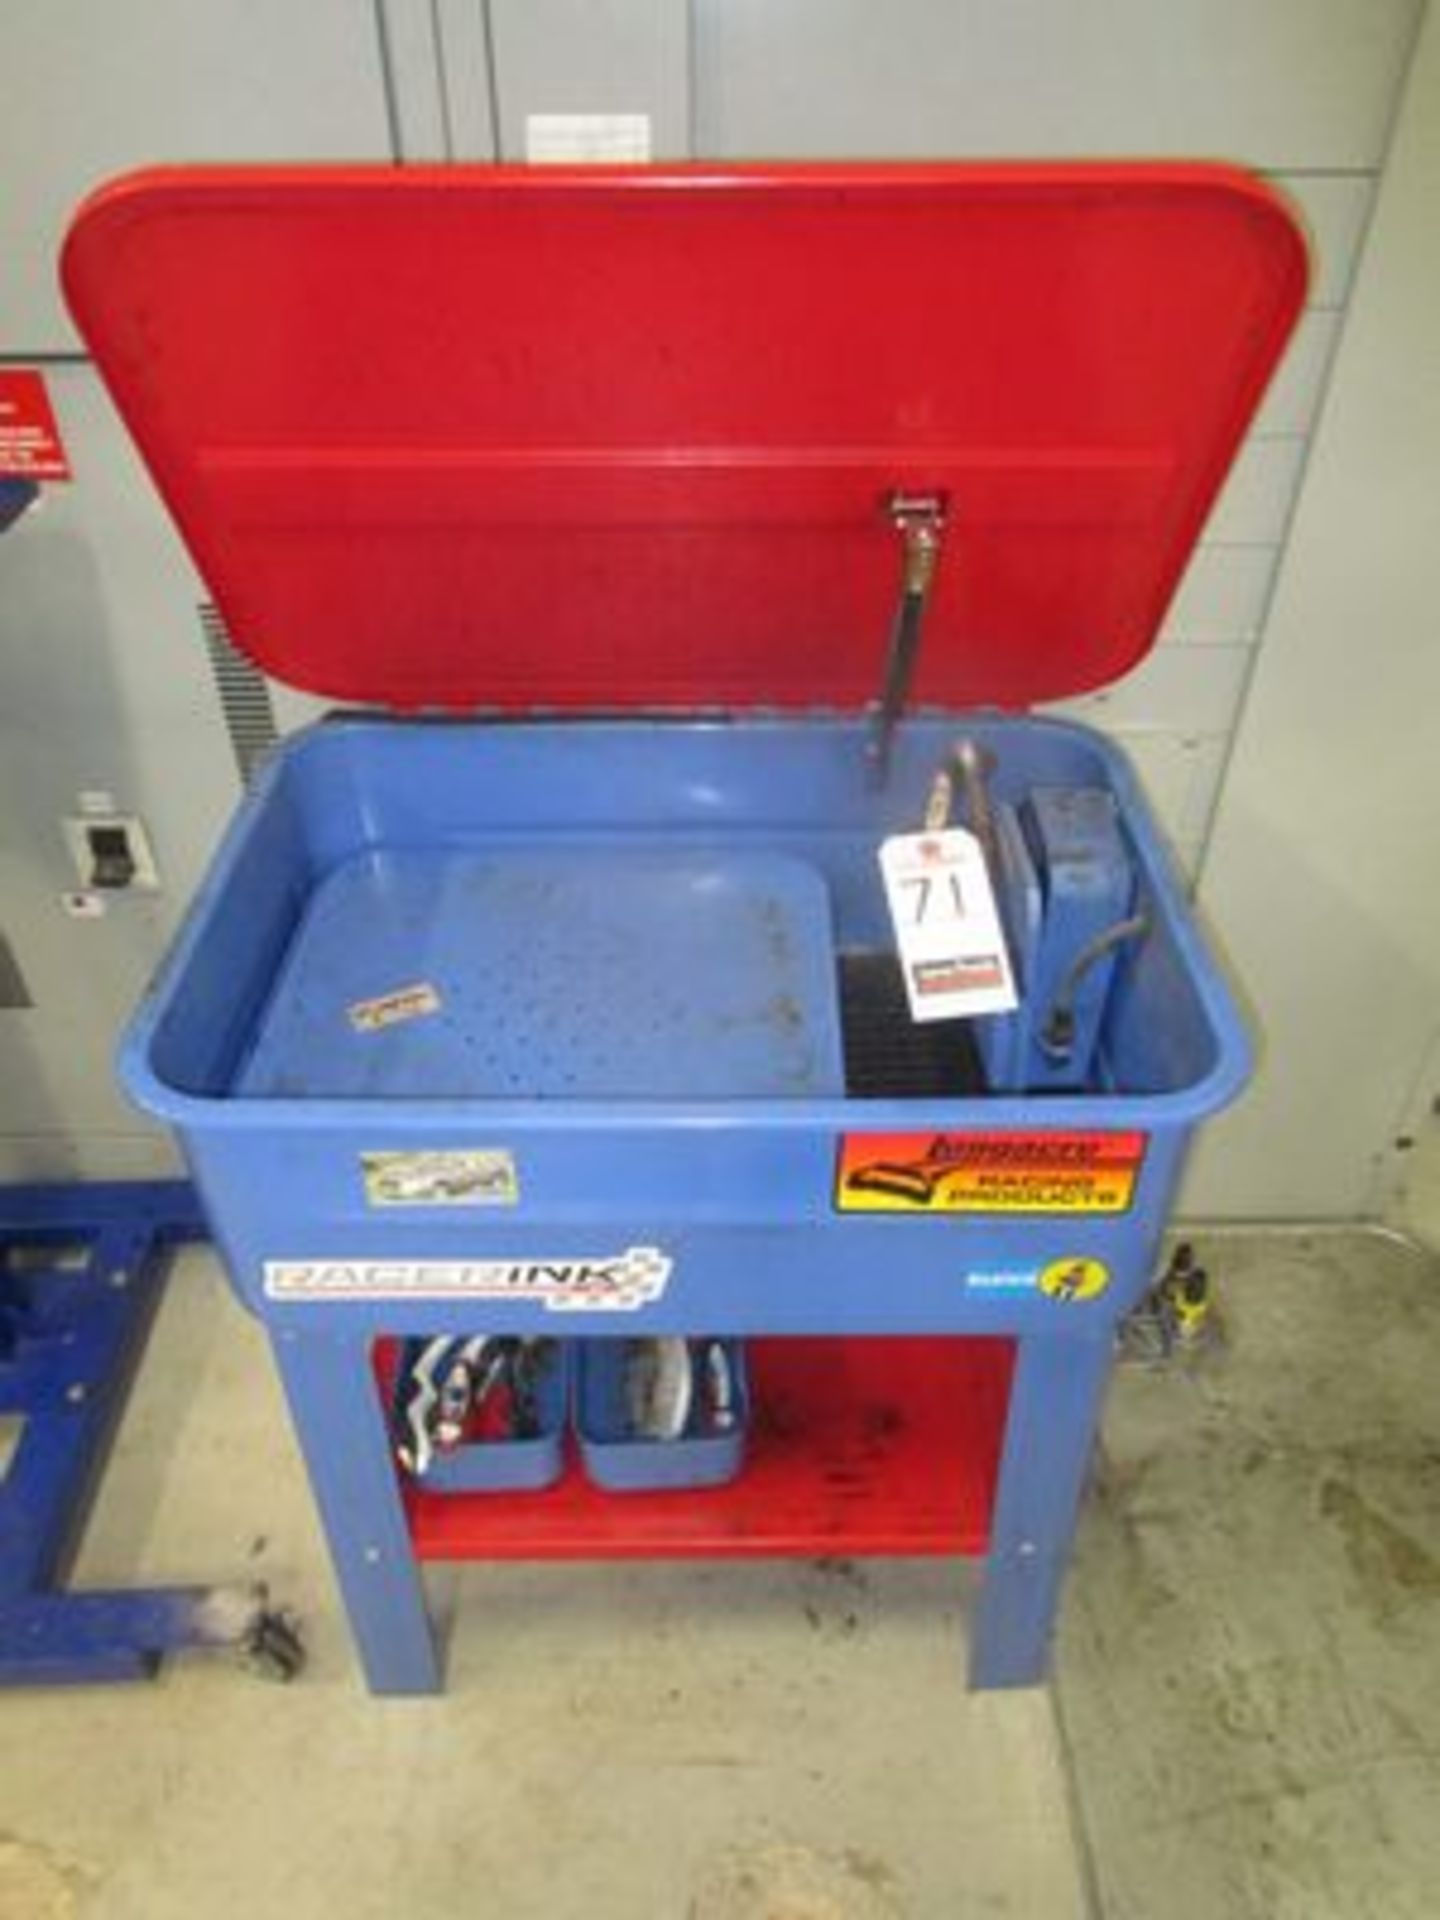 CENTRAL MACHINERY 30"X20" ELECTRIC PARTS WASHER